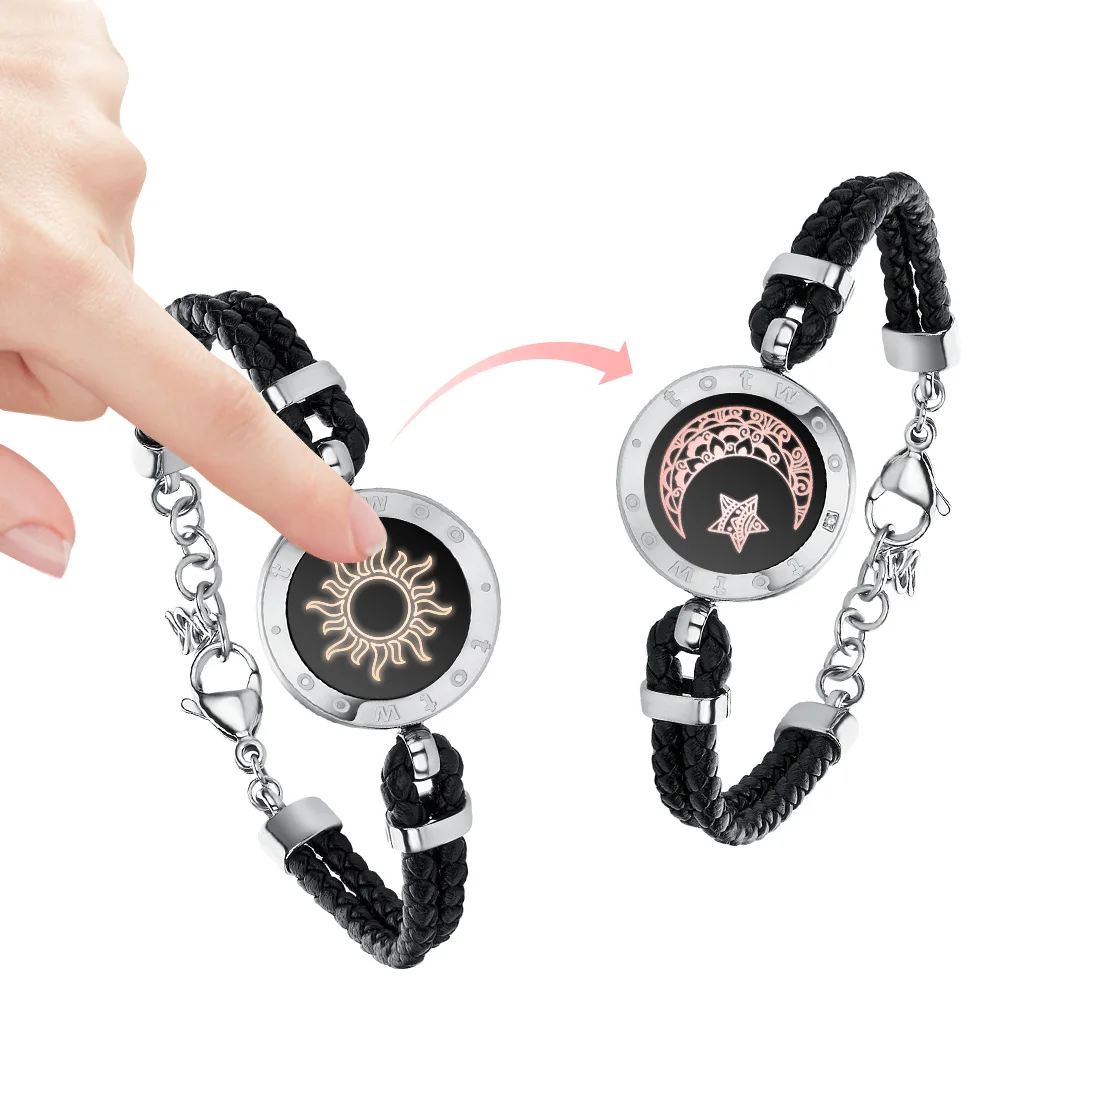 TOTWOO Long Distance Touch Bracelets for Couples ,Light up&Vibration Relationship Gifts for Couples Smart Jewelry Love Bracelets